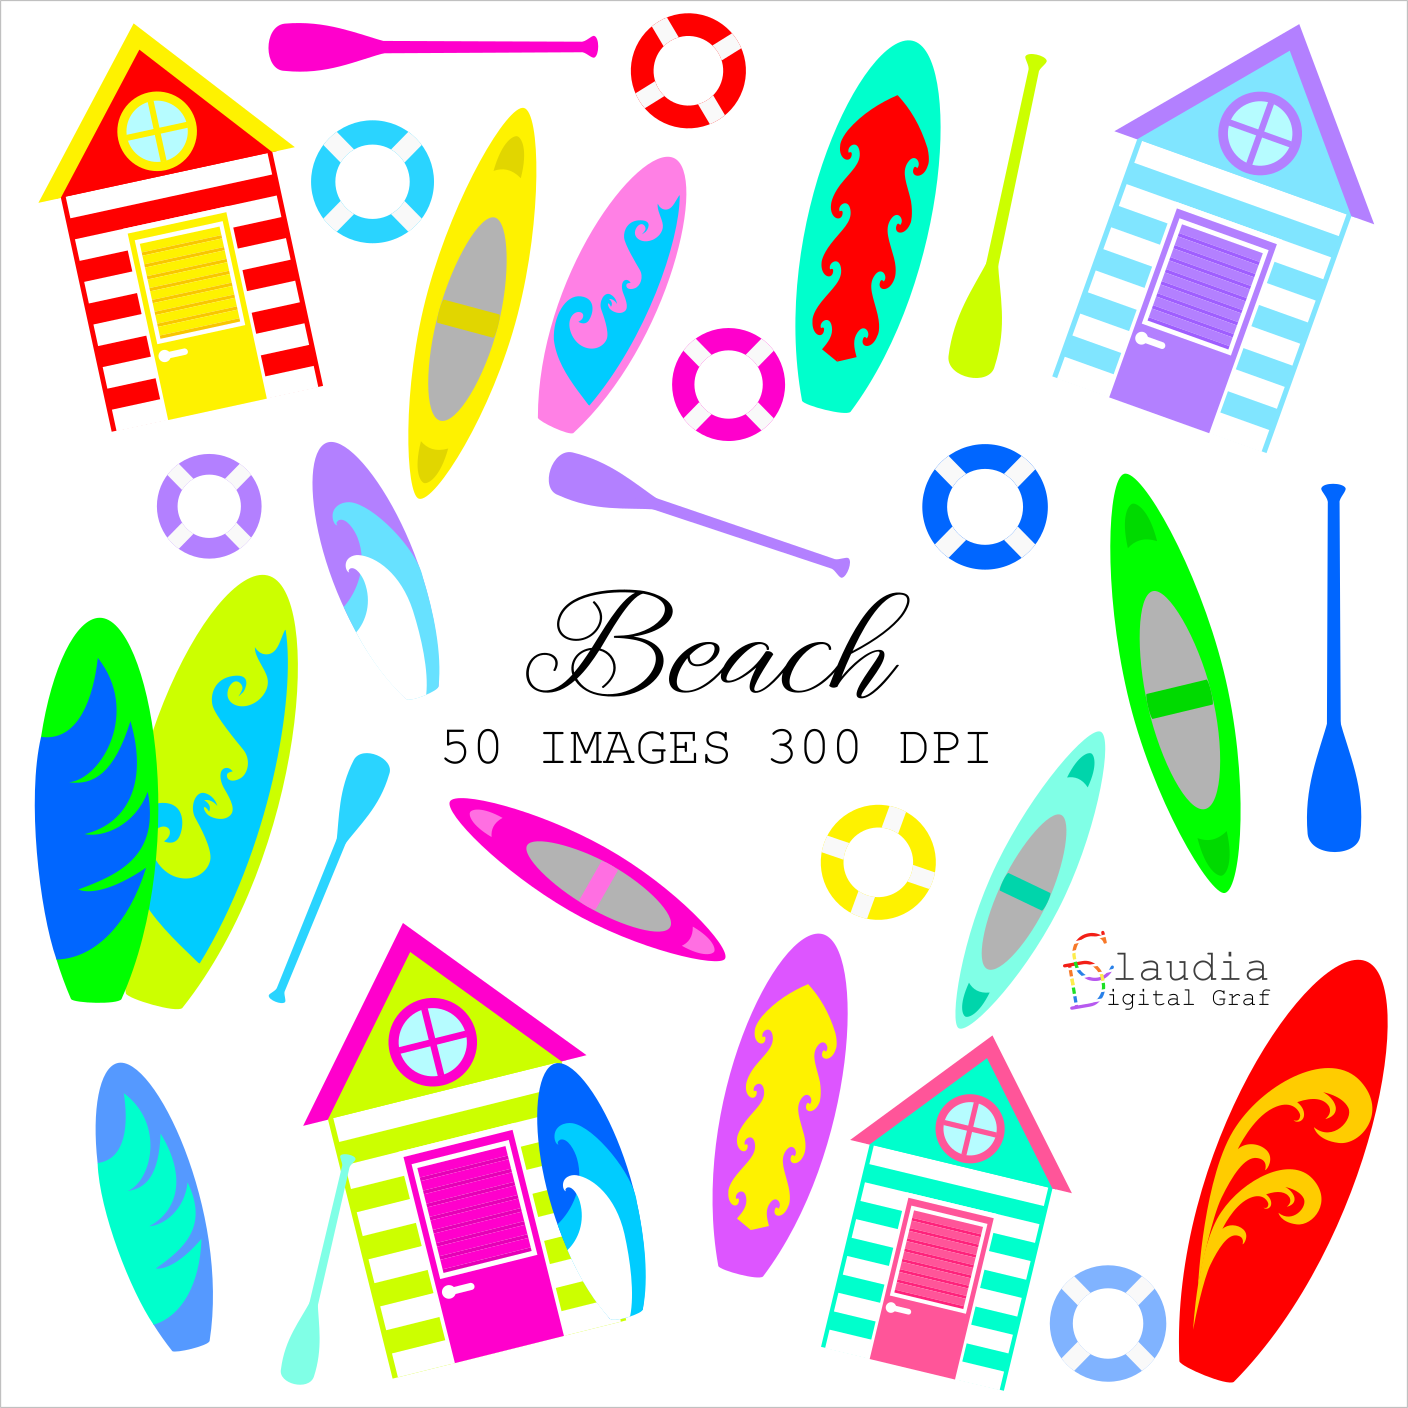 50 Summer beach Clip Art, Beach Hut Nautical, Colorful Surfboards, Vacation Icons, Hot Summer Vacation, Sport in the Waves, Digital PNG cover image.